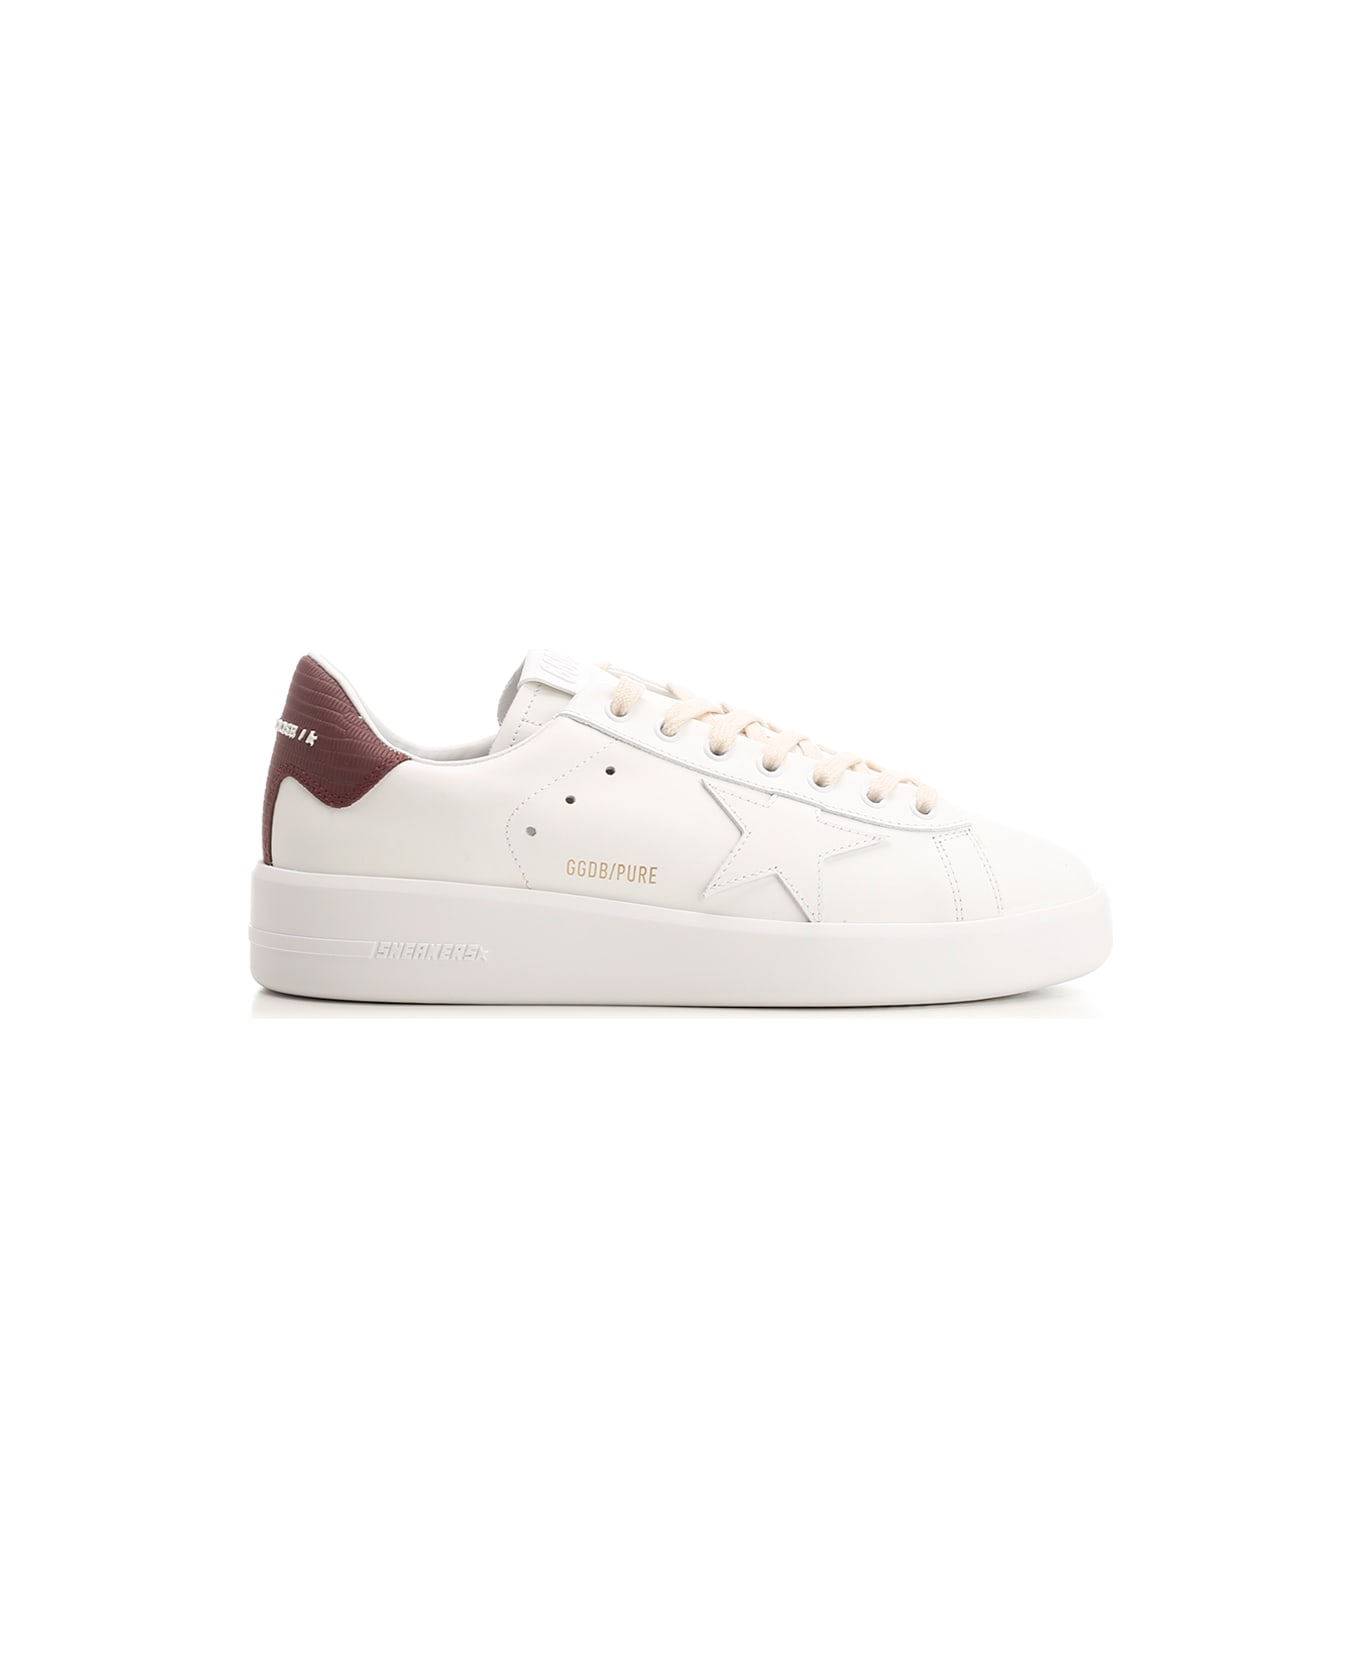 Golden Goose Pure New Leather Sneakers - White/Bordeaux スニーカー